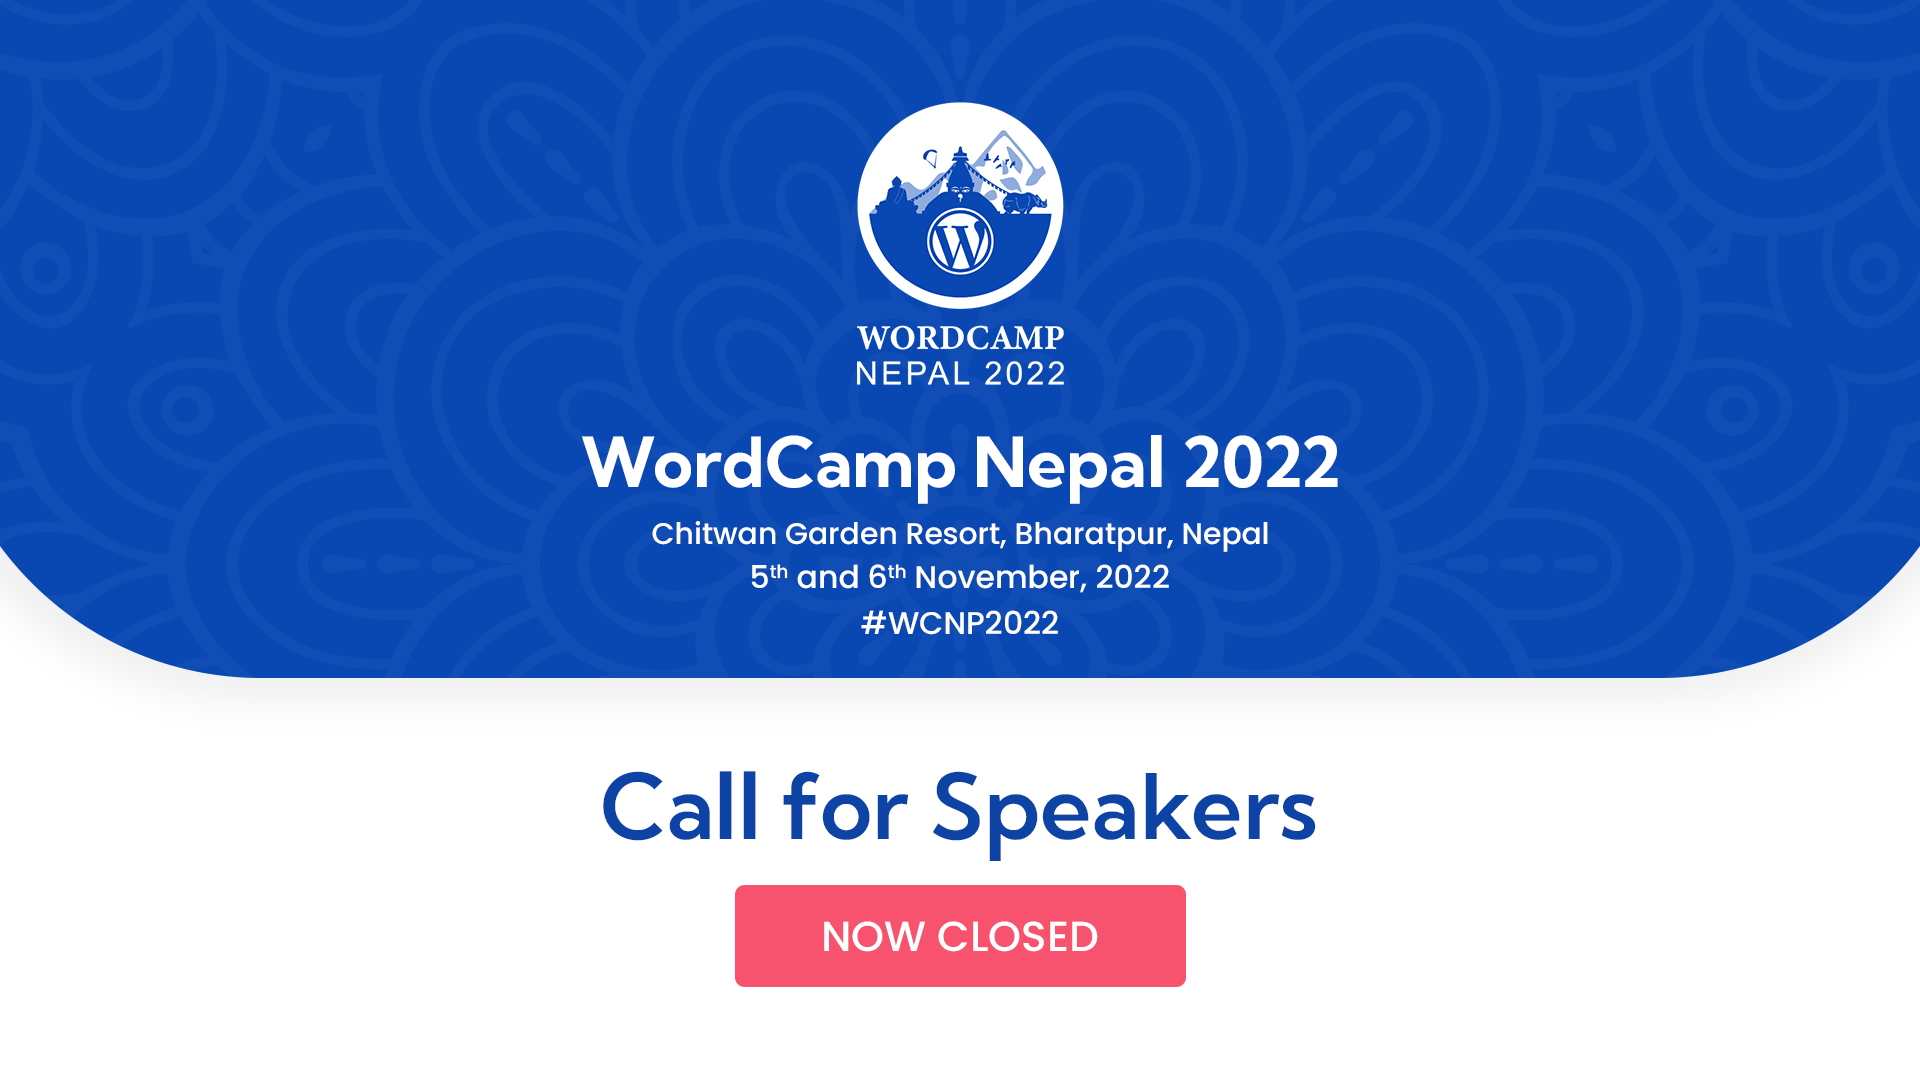 Call for Speakers – Closed